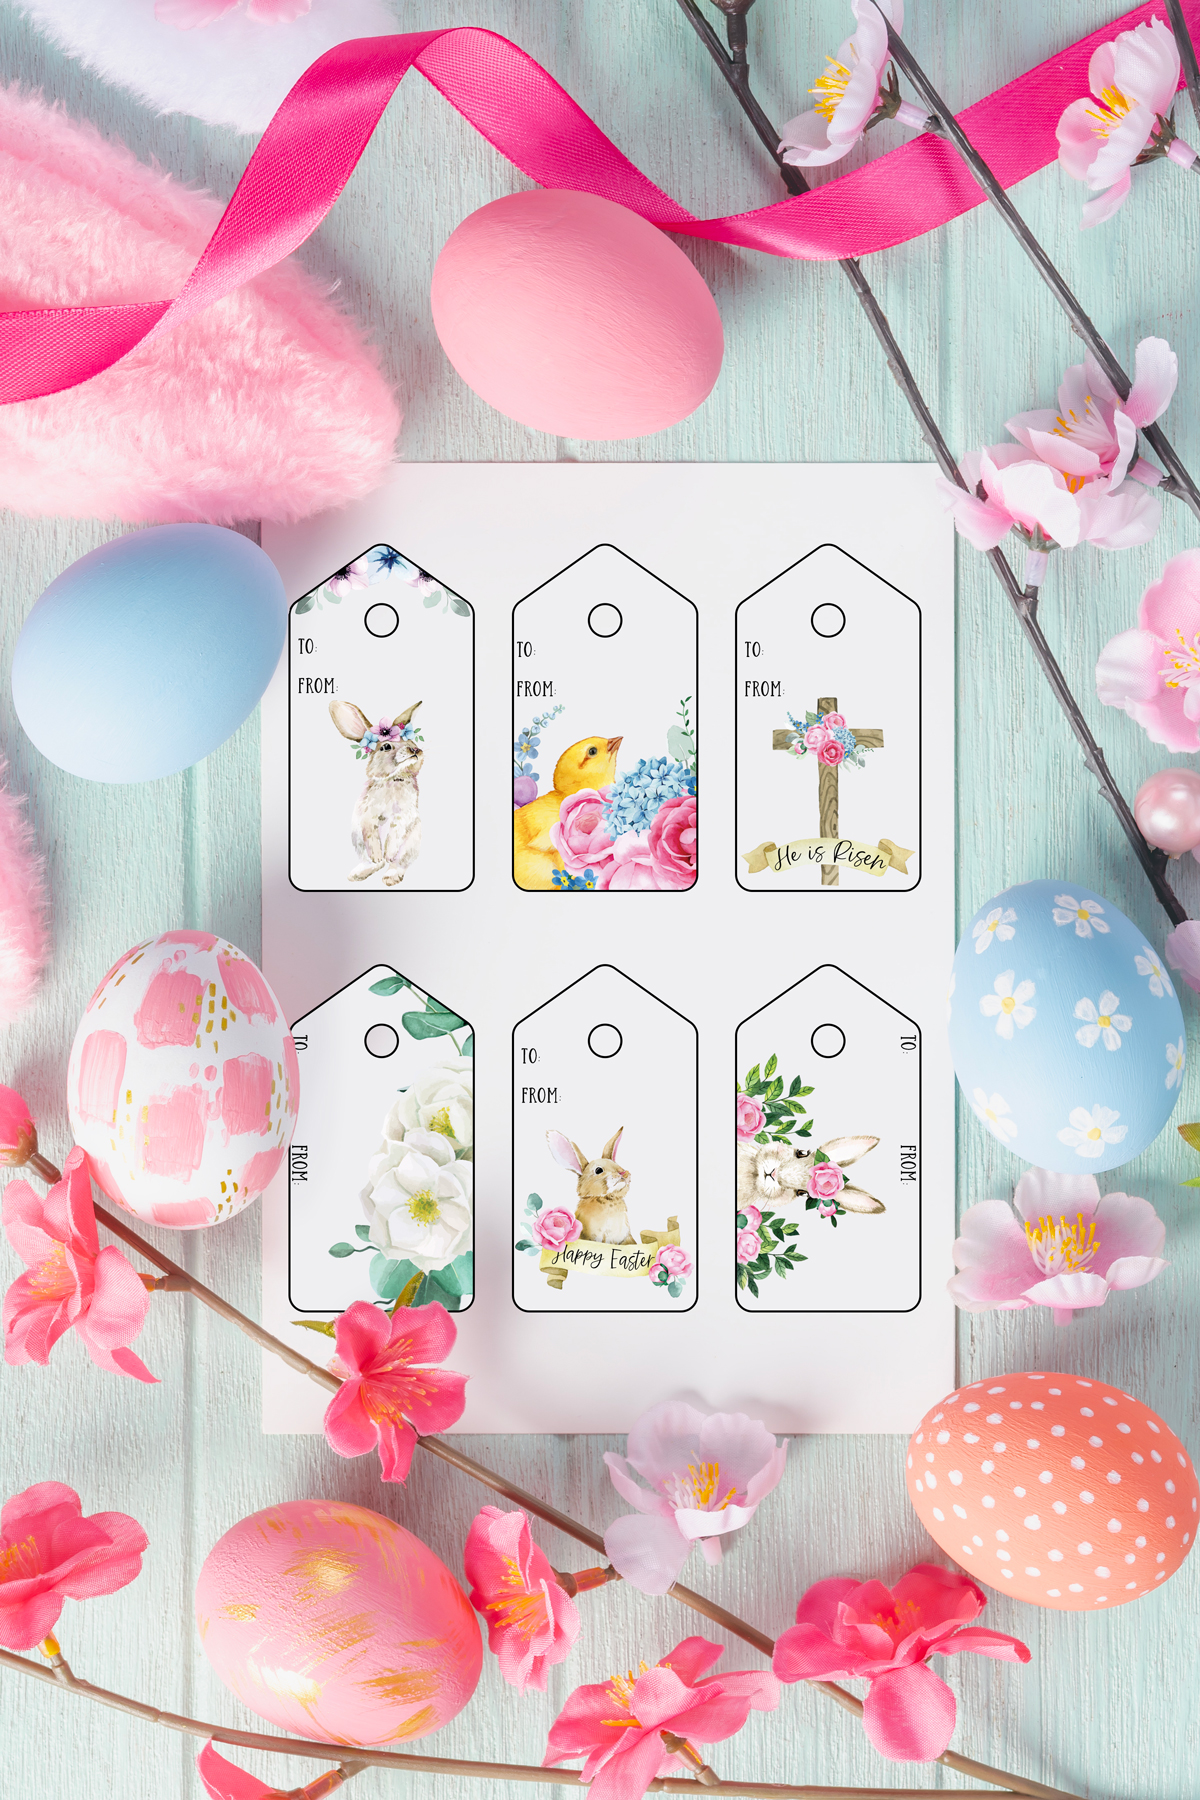 This image shows the 6 free pretty printable Easter gift tags you can download at the end of this post. They are in in a traditional pale color scheme. Each design is different - there are Easter bunny rabbits, a cross, a chick, and lots of florals. The tags are surrounded by ribbon, flowers, and Easter eggs.